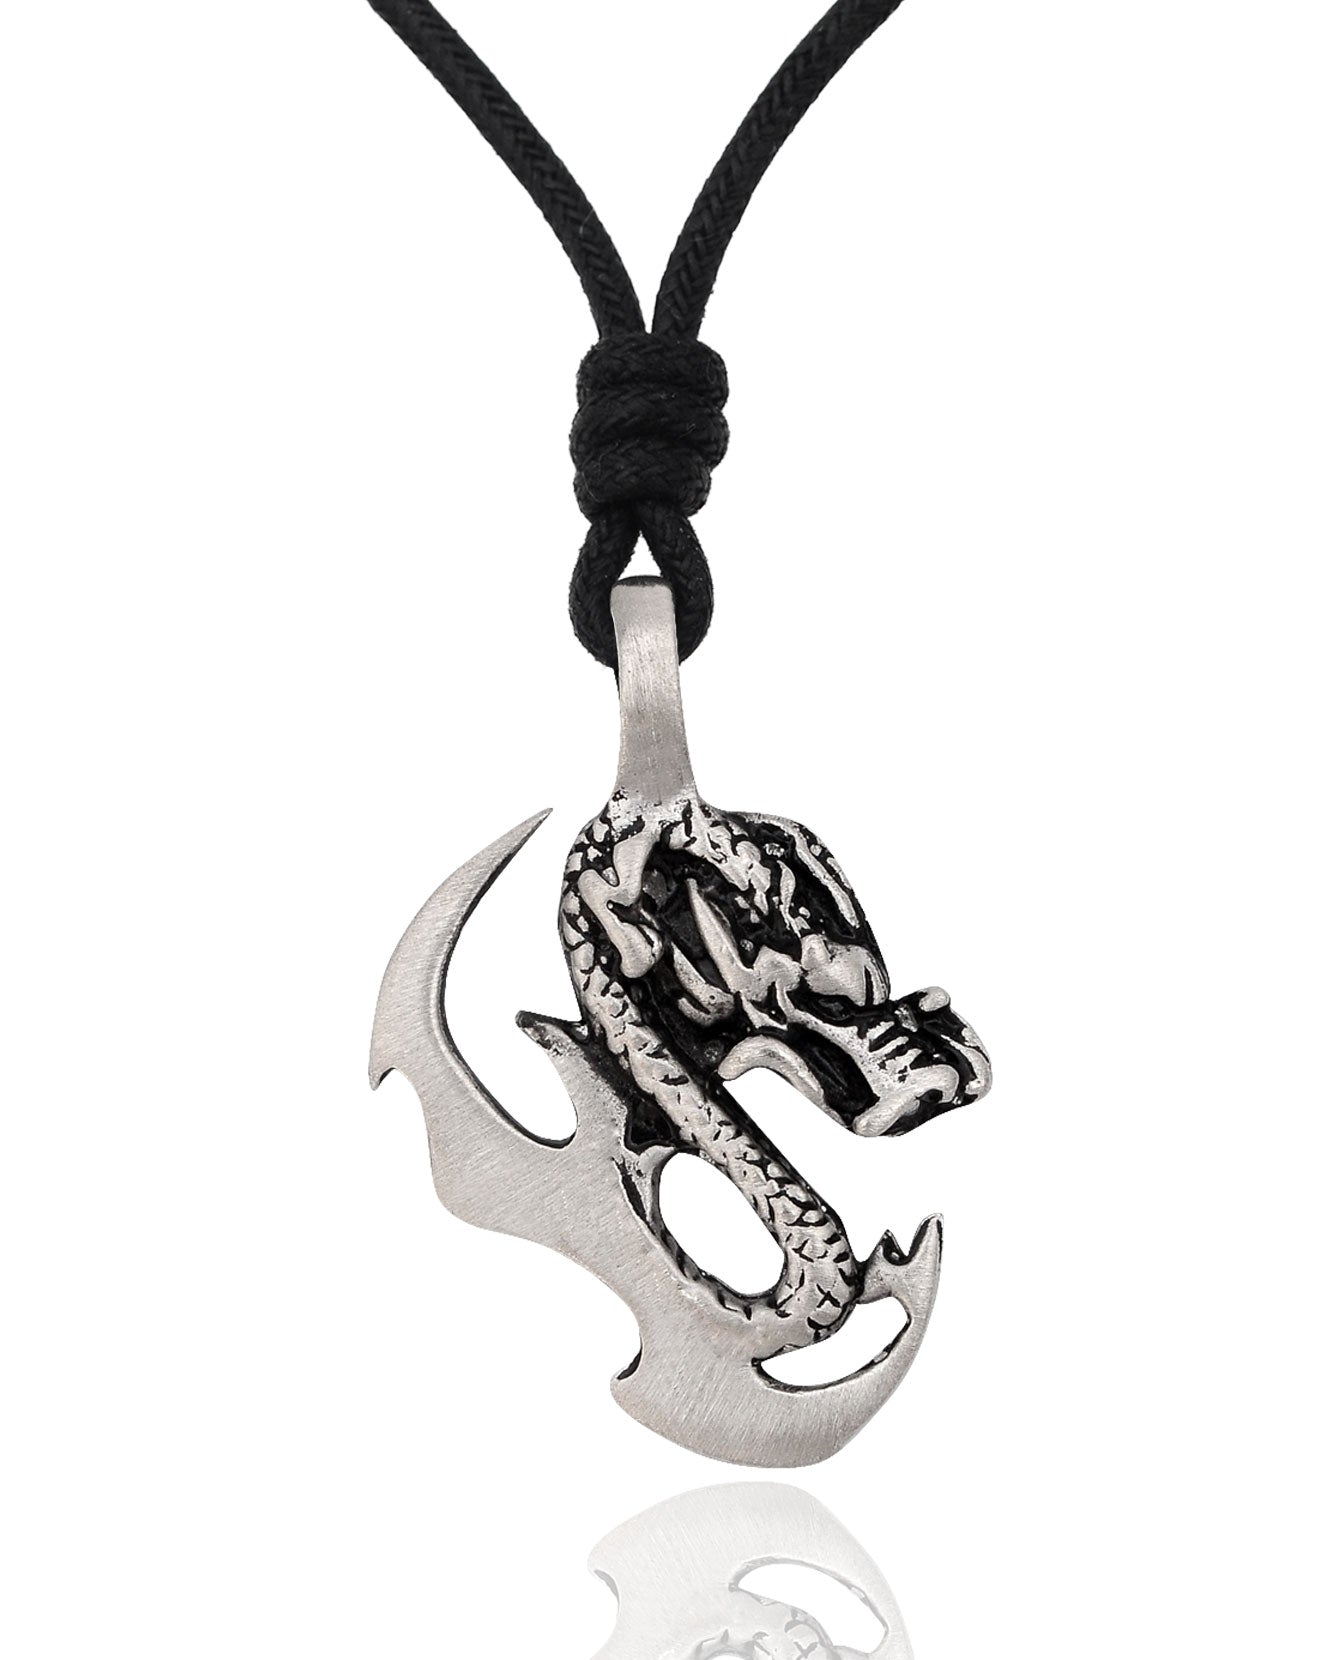 Cool Dragon Silver Pewter Charm Necklace Pendant Jewelry